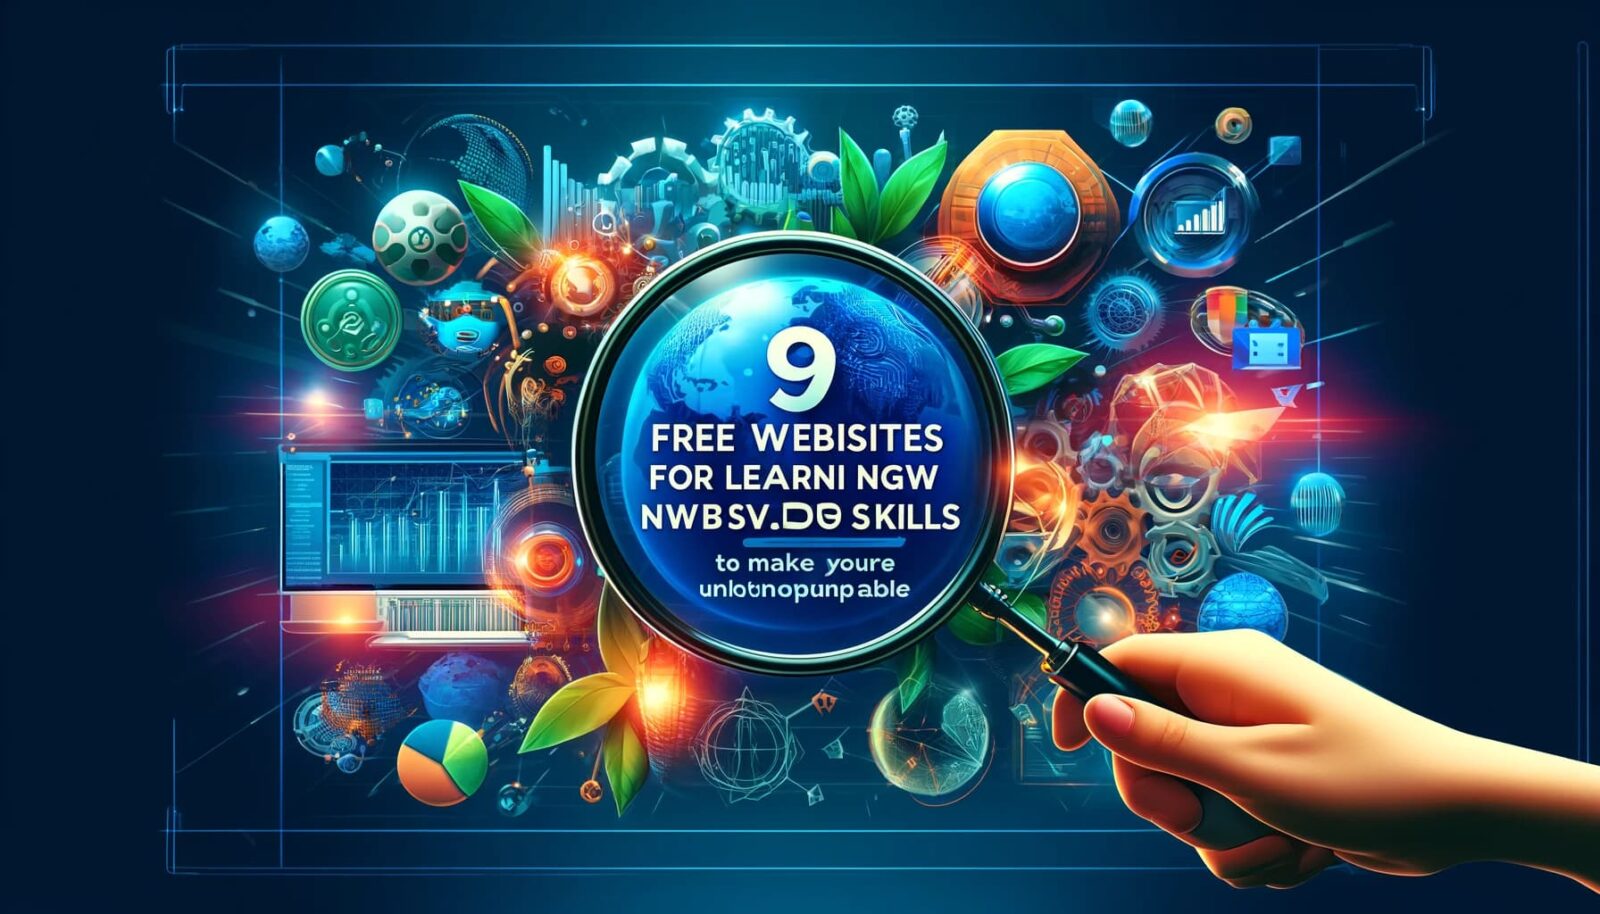 '9 Free Websites for Learning New SEO Skills'.